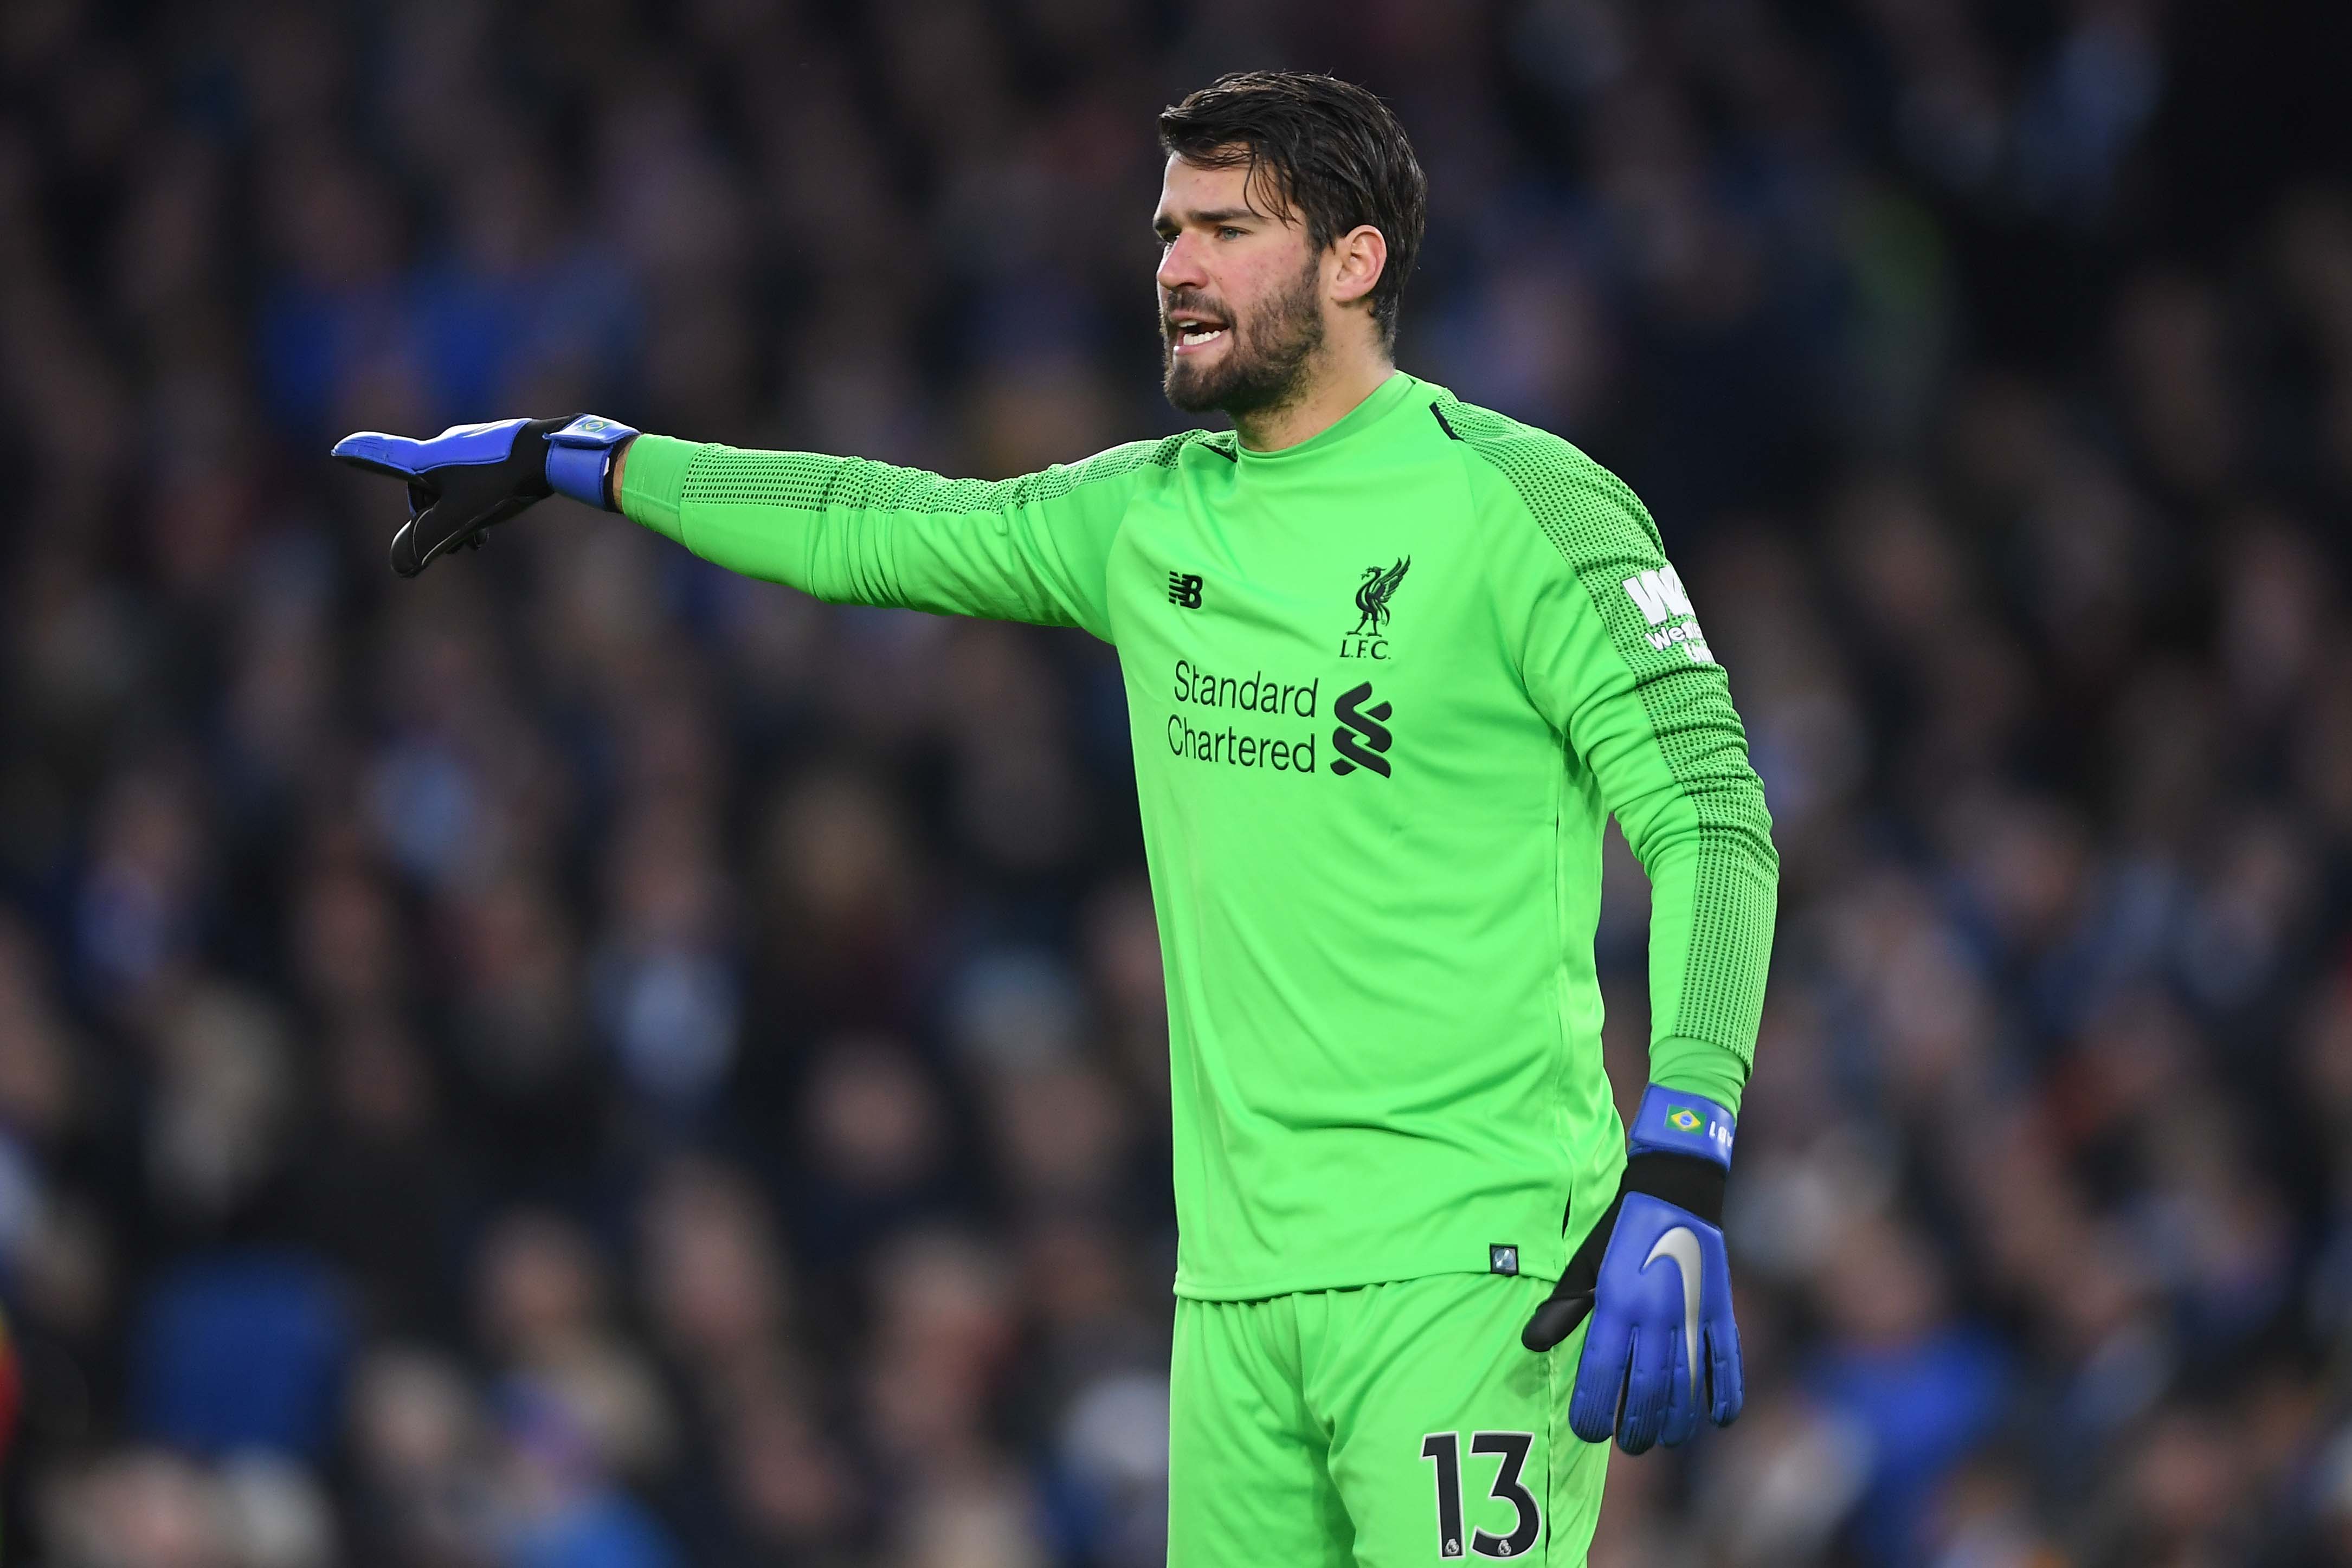 BRIGHTON, ENGLAND - JANUARY 12: Alisson Becker of Liverpool points during the Premier League match between Brighton & Hove Albion and Liverpool FC at American Express Community Stadium on January 12, 2019 in Brighton, United Kingdom. (Photo by Mike Hewitt/Getty Images)